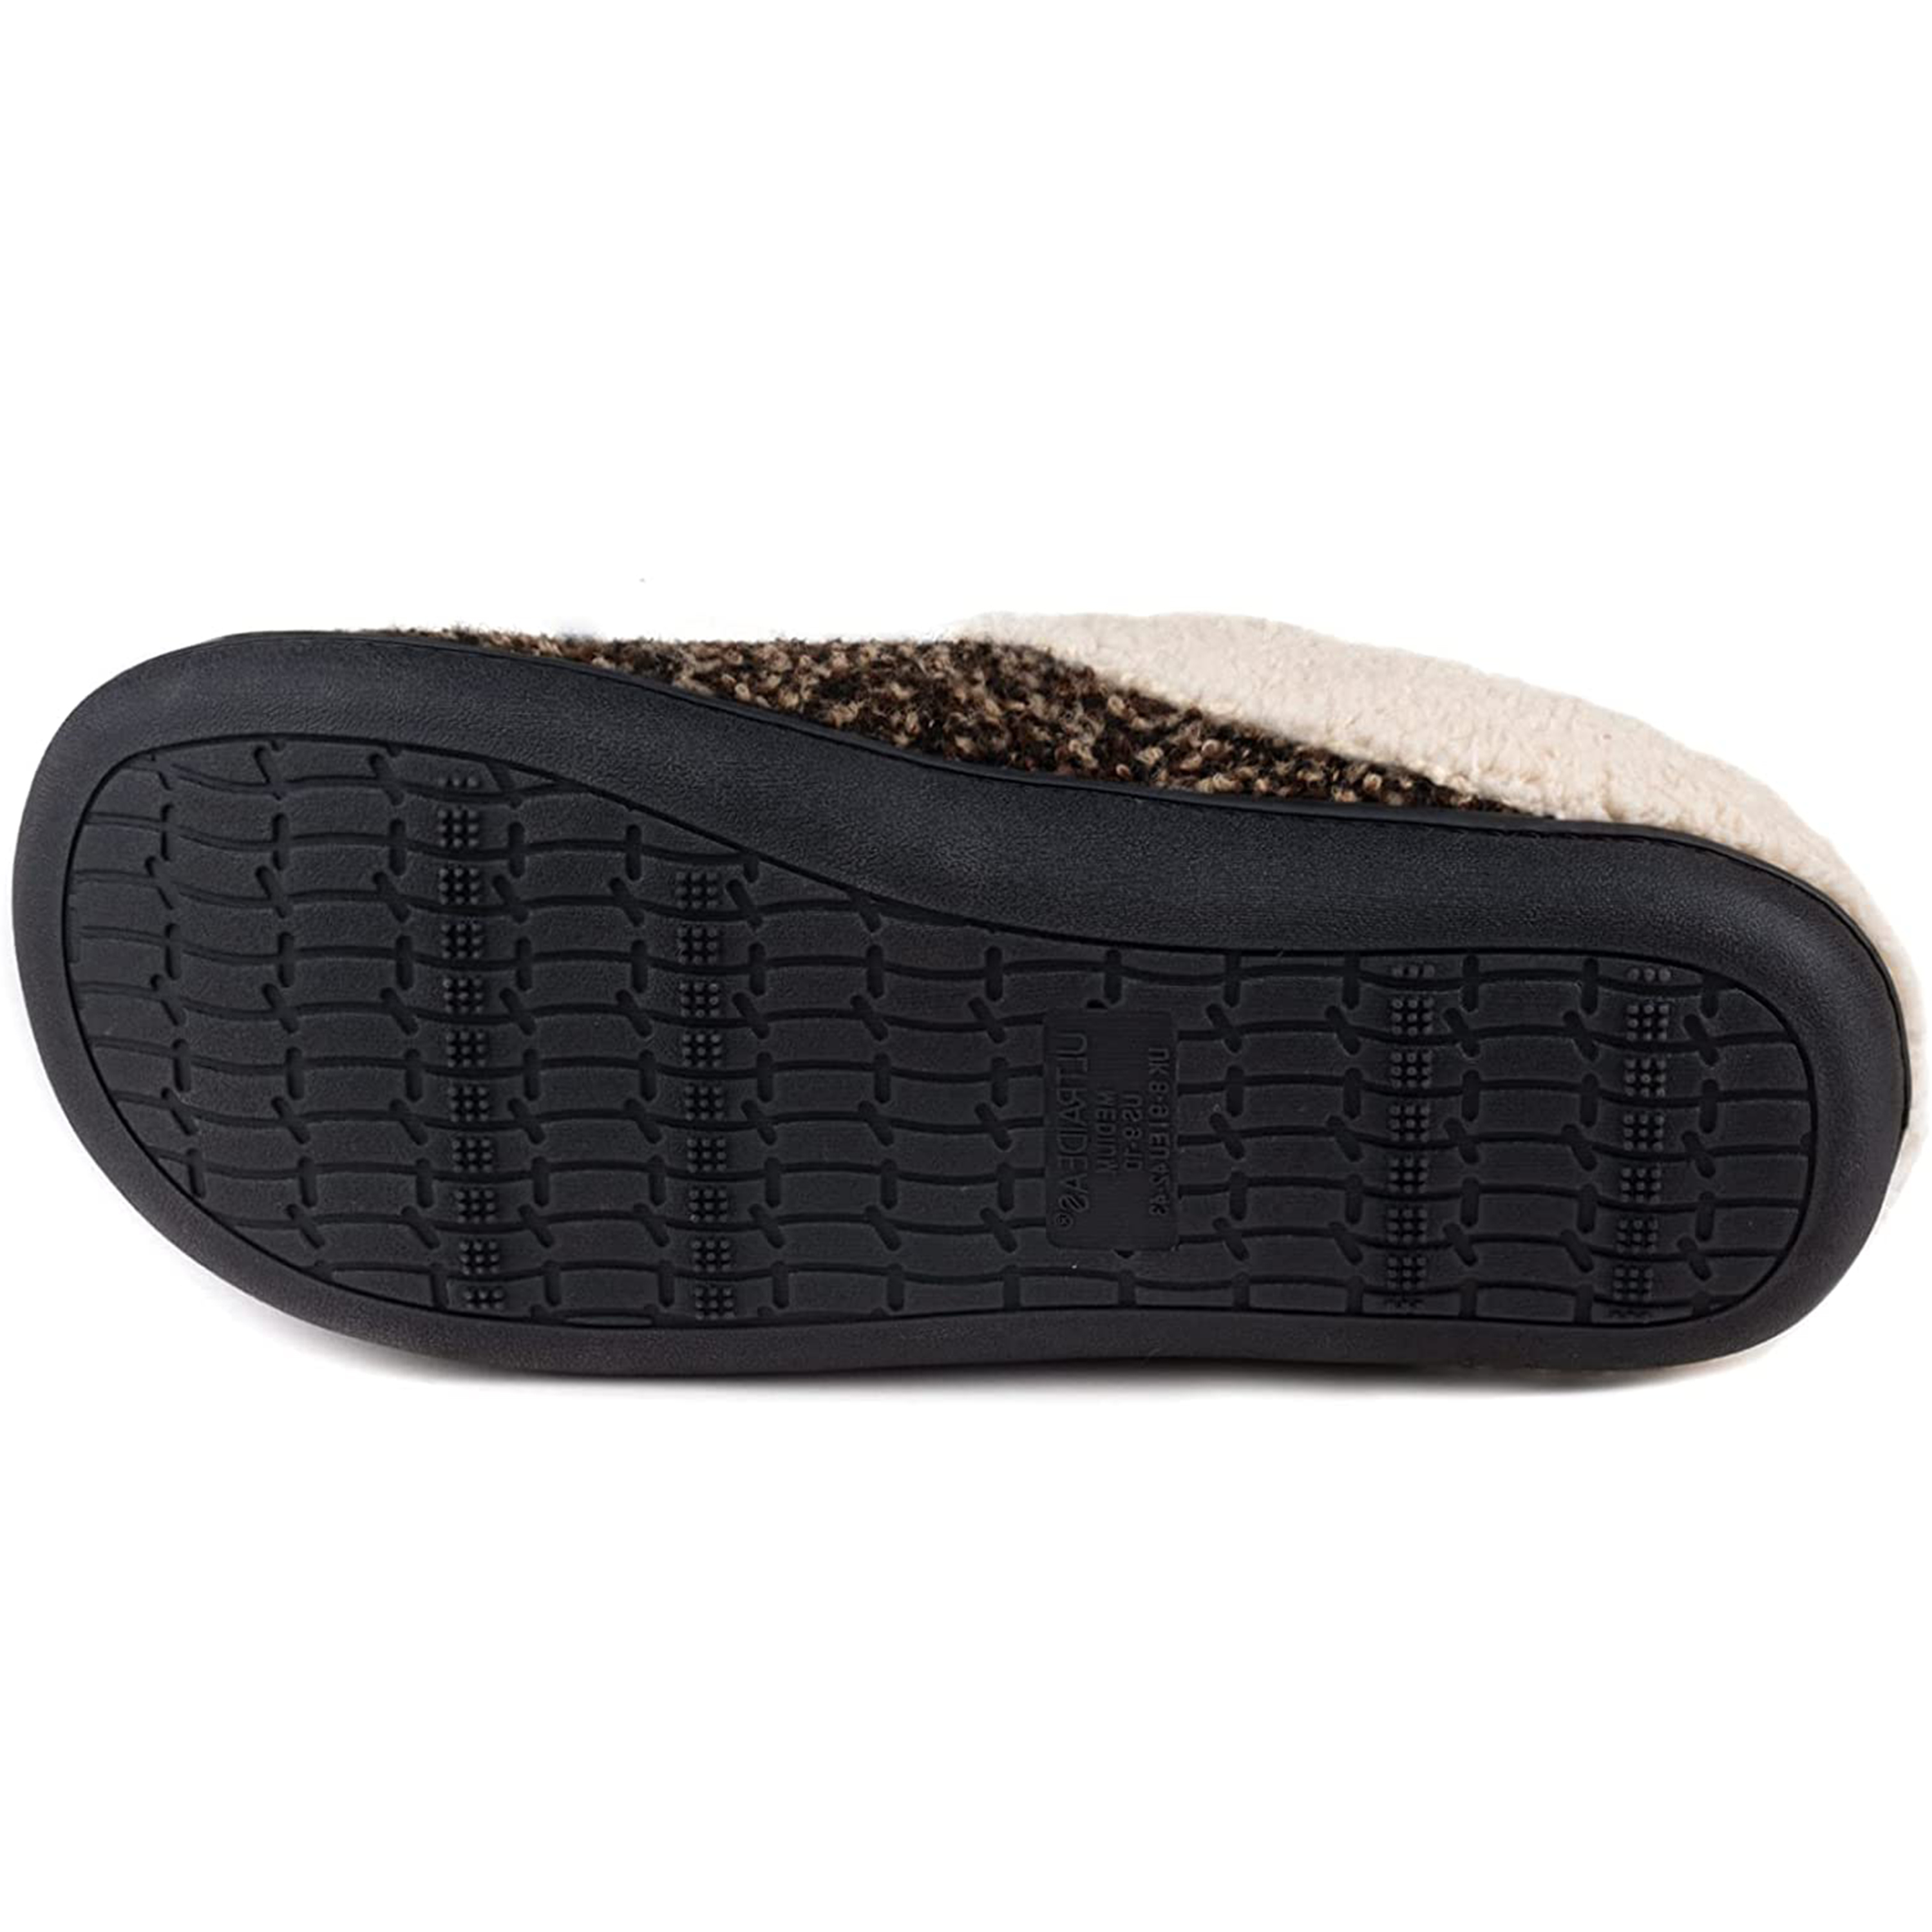 Men's Cozy Memory Foam Slippers with Fuzzy Plush Wool-Like Lining, Slip on Clog House Shoes with Indoor Outdoor Anti-Skid Rubber Sole - image 5 of 5